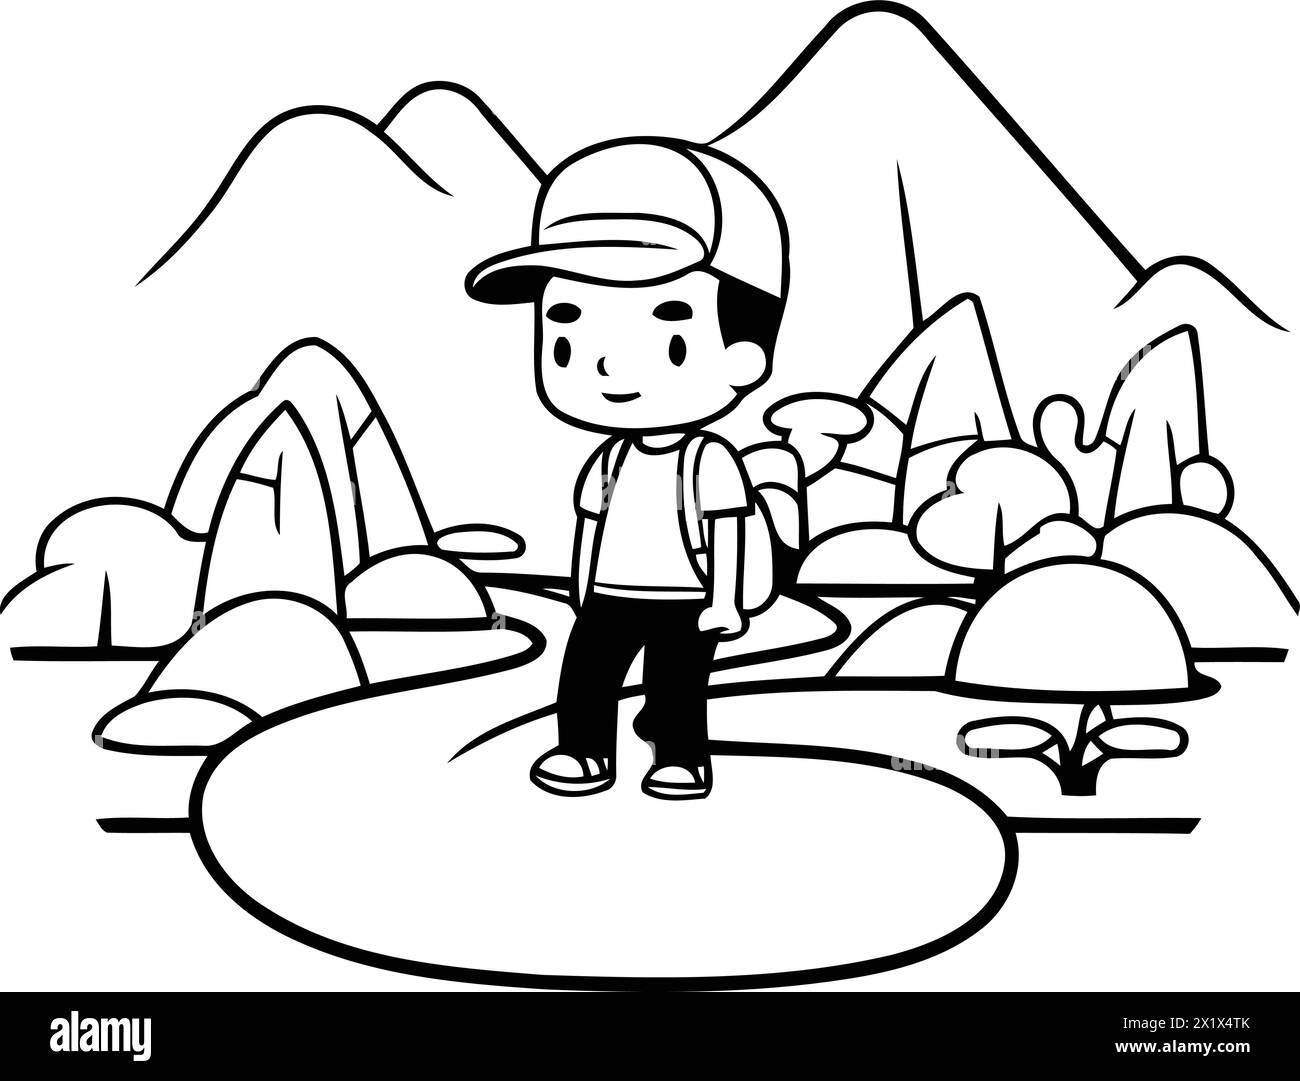 Hiking boy cartoon in the park round icon vector illustration graphic design Stock Vector